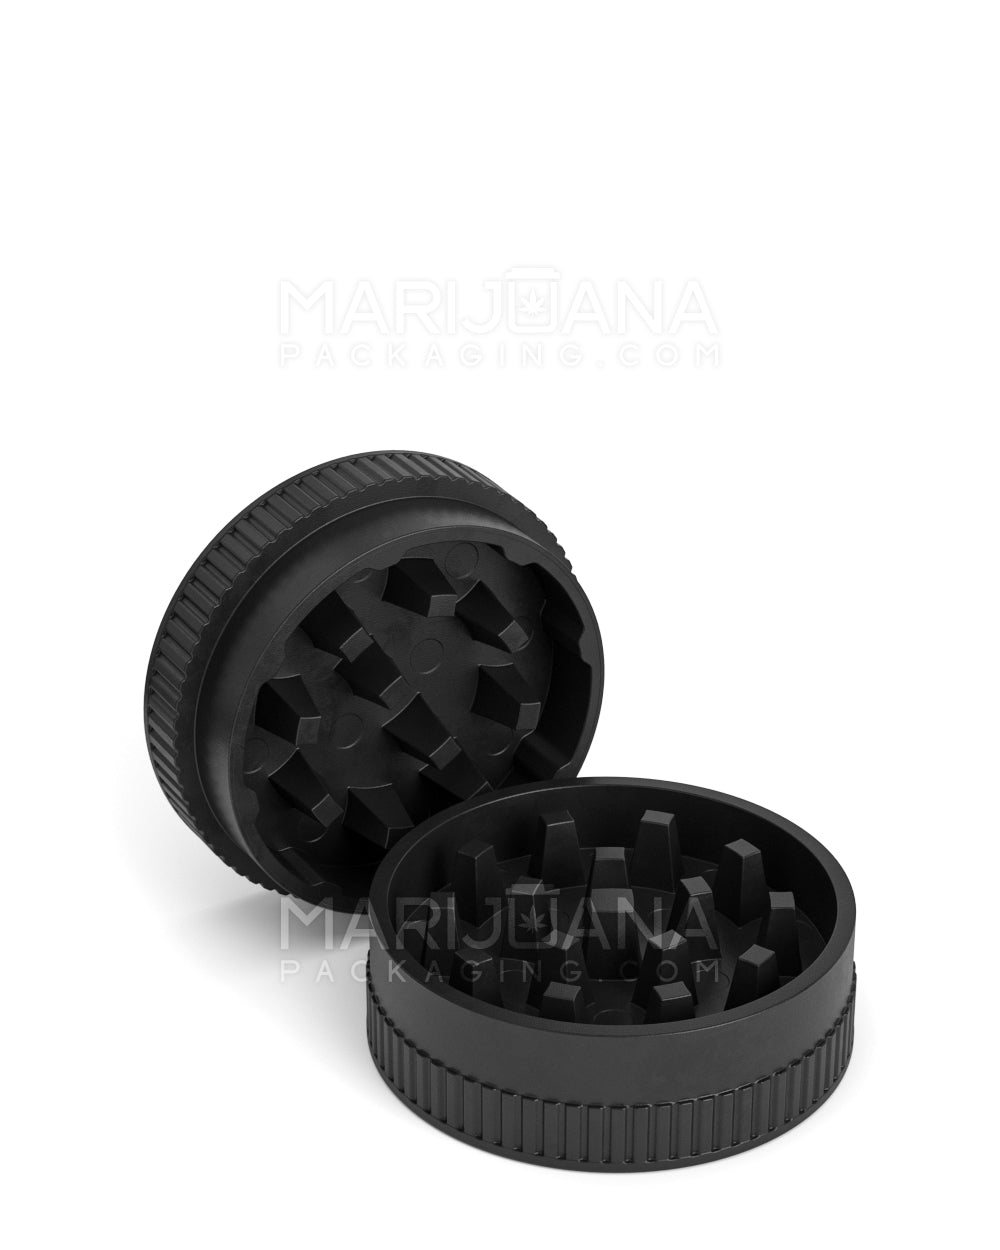 Biodegradable Thick Wall Black Grinder | 2 Piece - 55mm - 12 Count - 6